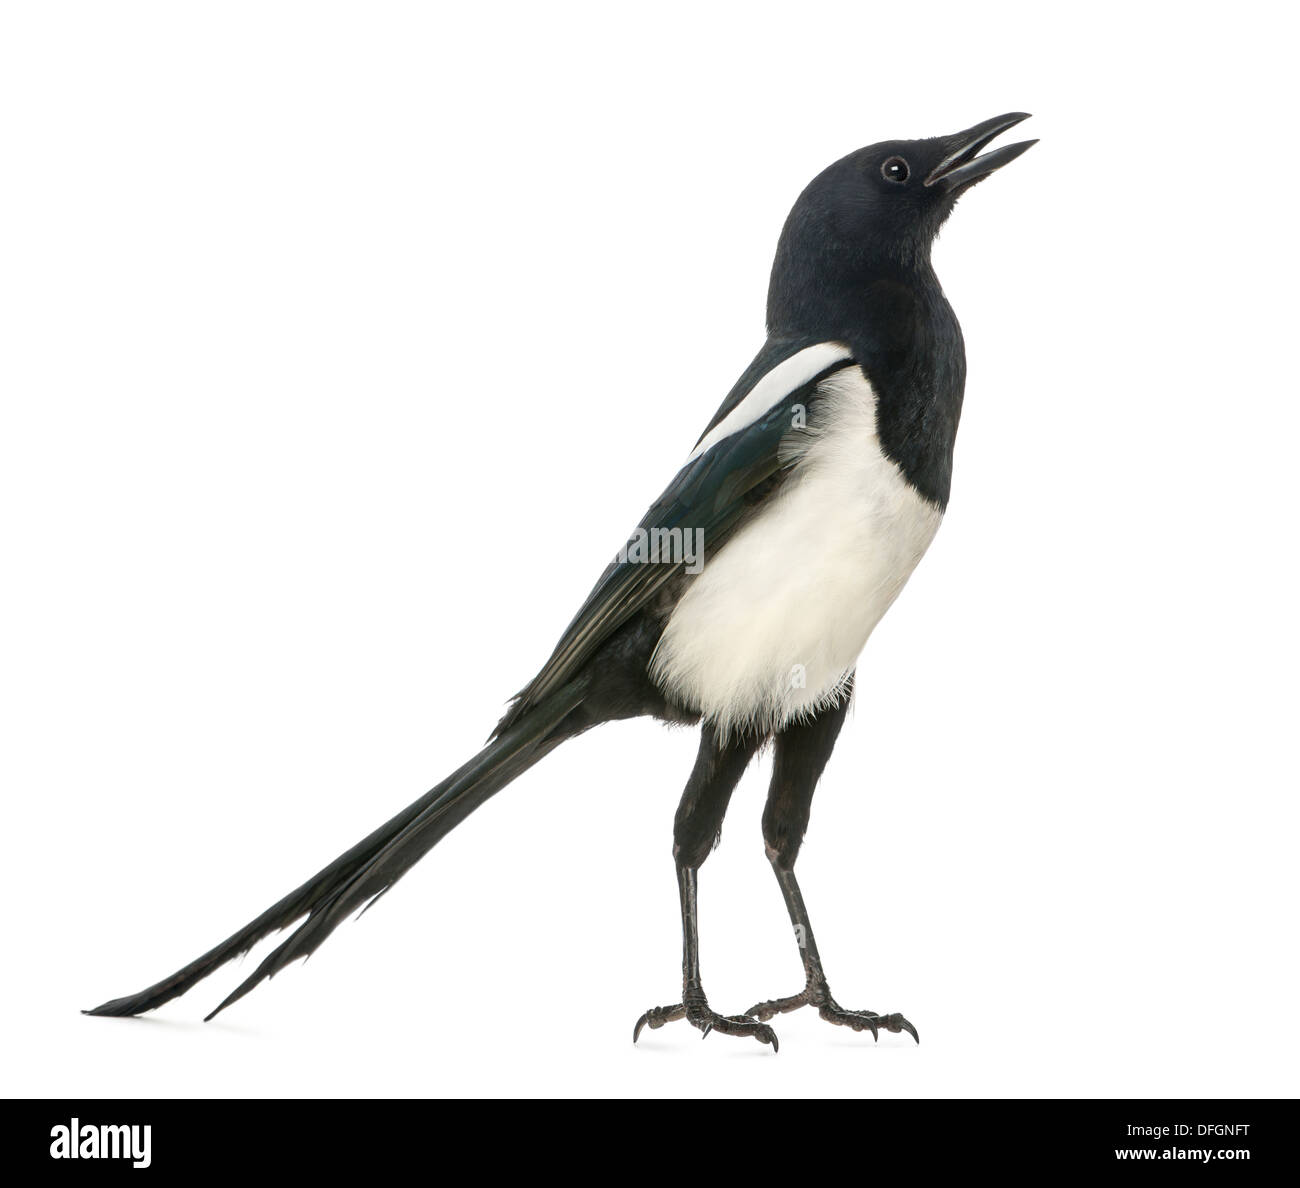 Common Magpie chattering, upright, Pica pica, against white background Stock Photo